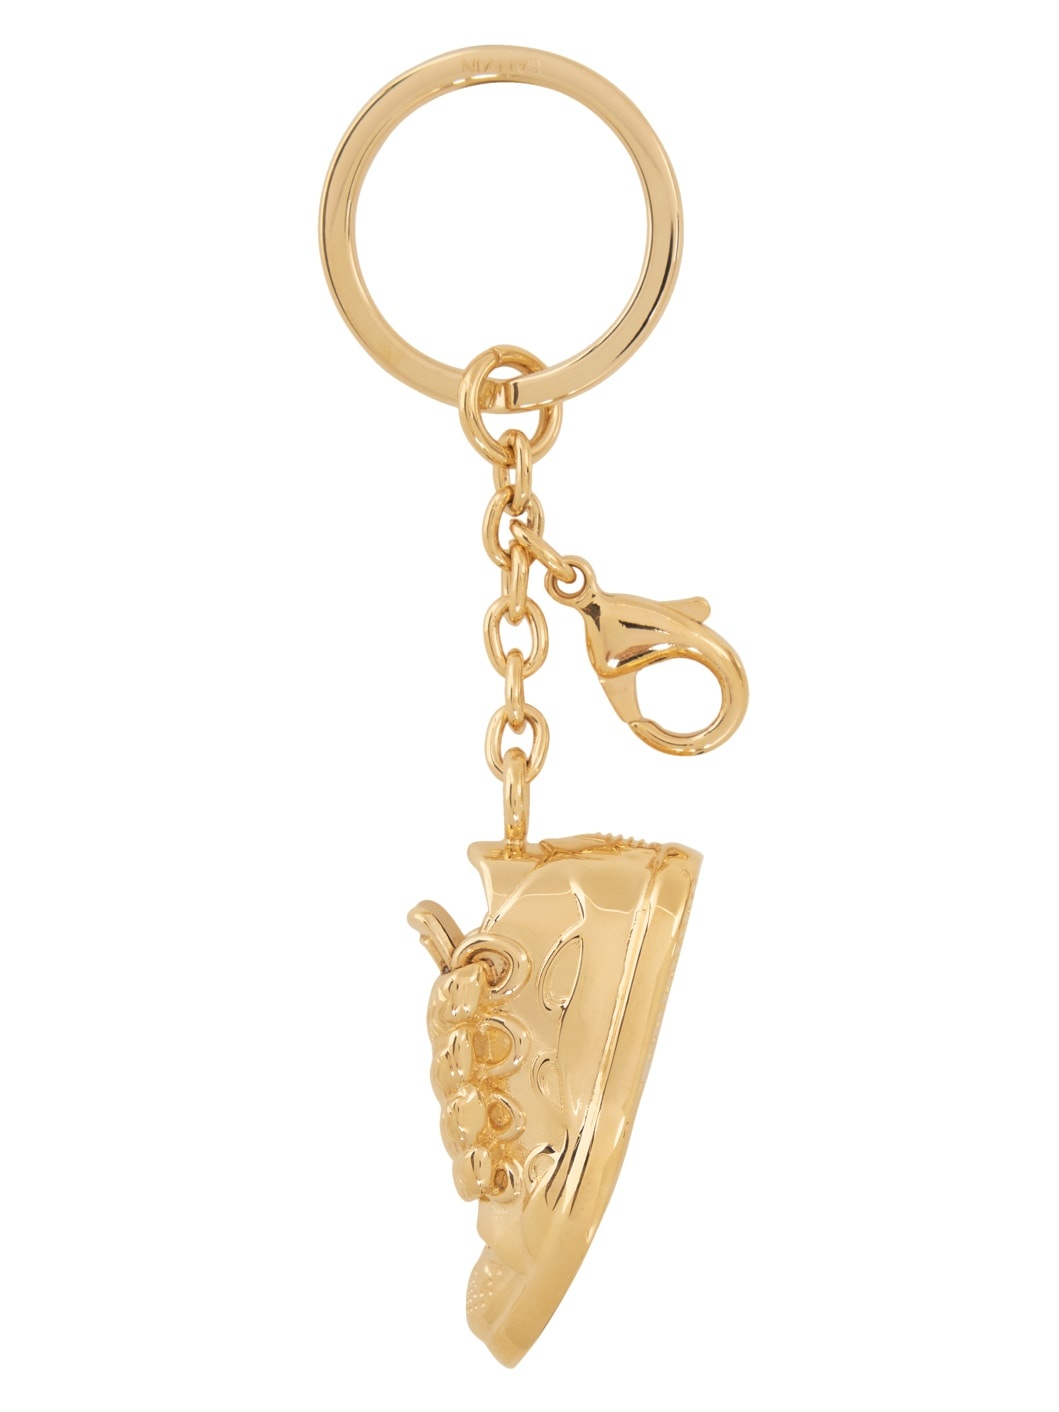 Gold Curb Sneakers Key Chain - 2